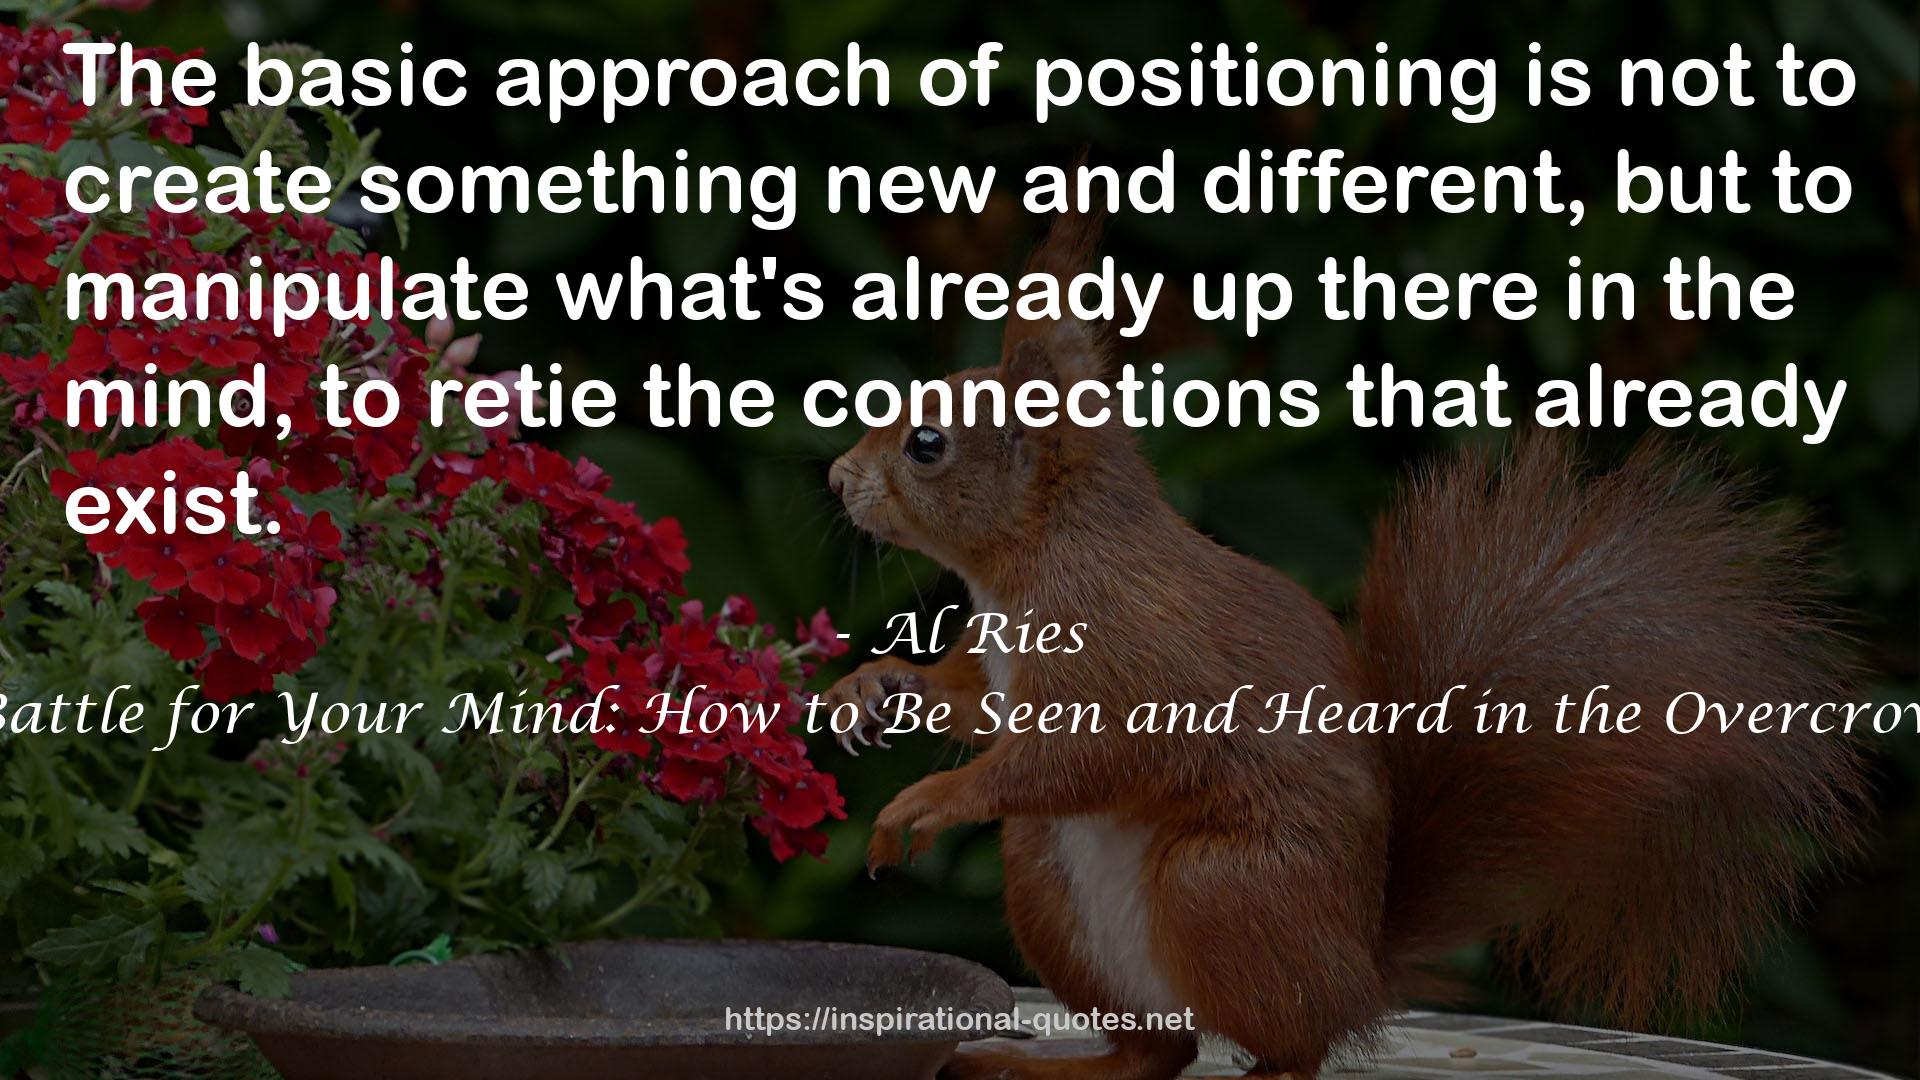 Positioning: The Battle for Your Mind: How to Be Seen and Heard in the Overcrowded Marketplace QUOTES